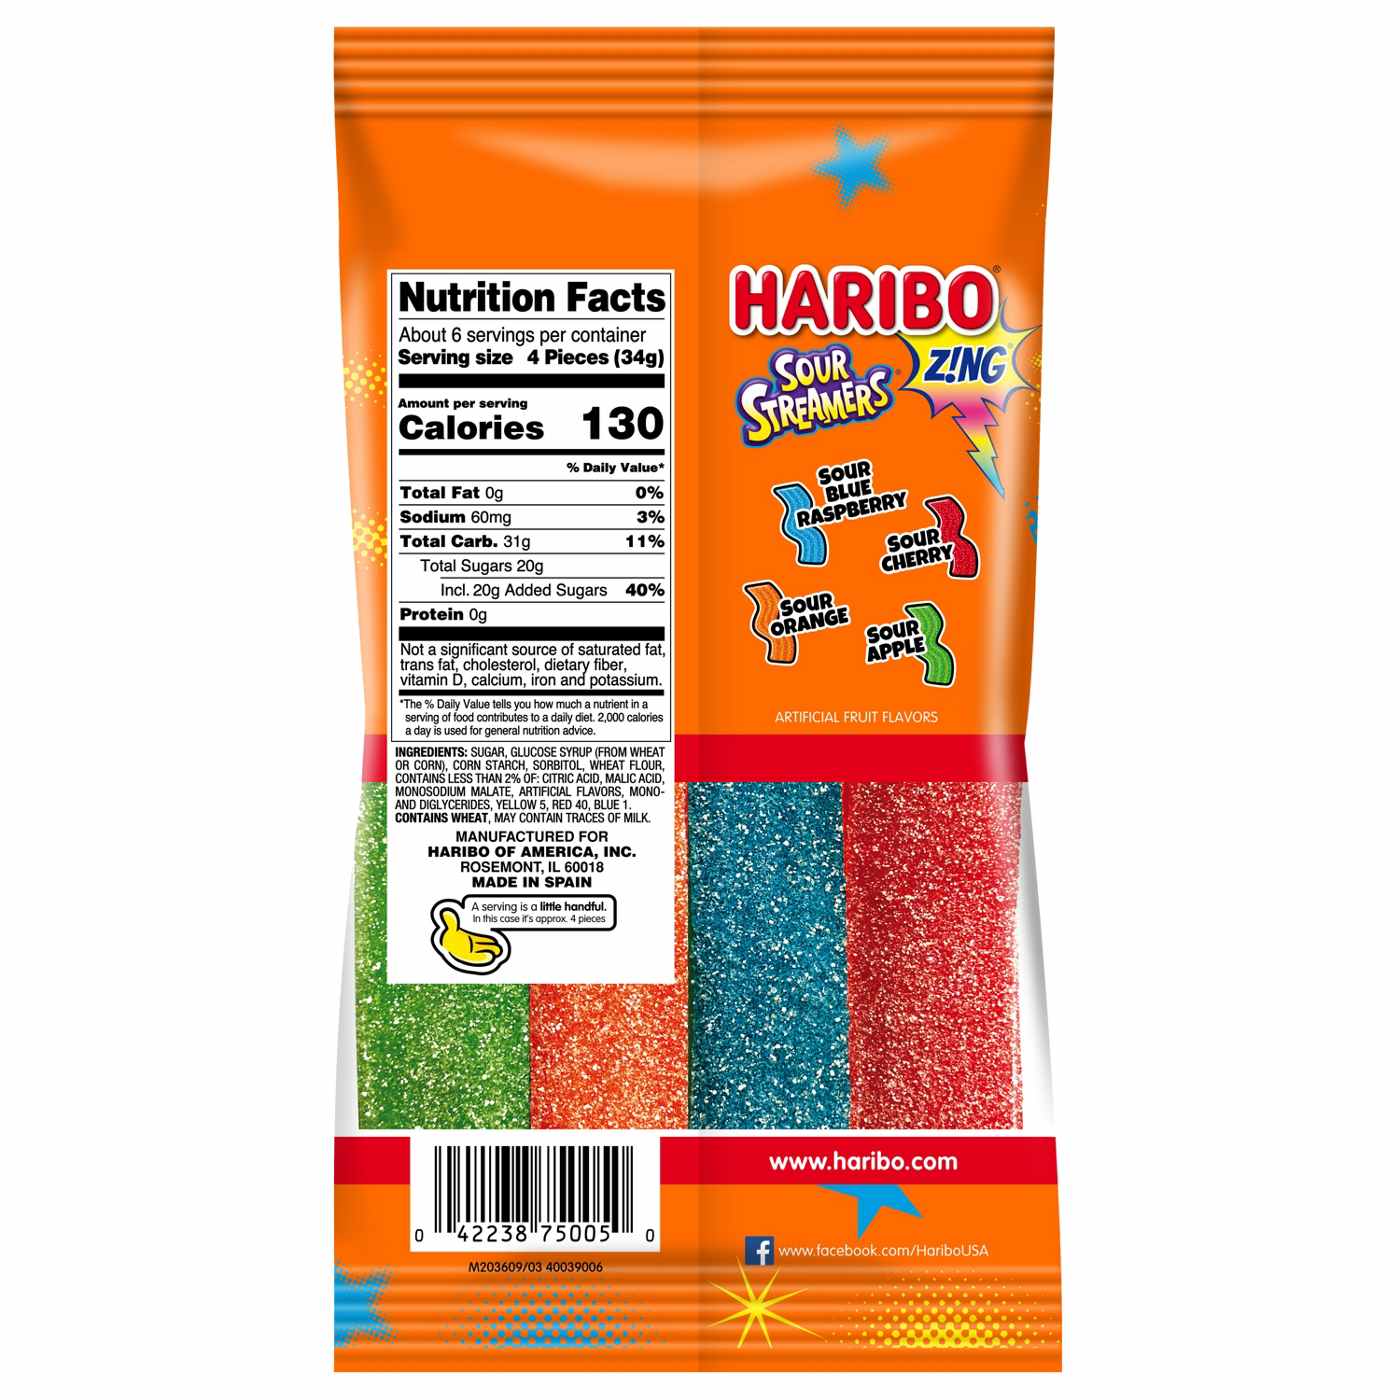 Haribo Sour Streamers Gummi Candy - Share Size; image 2 of 2